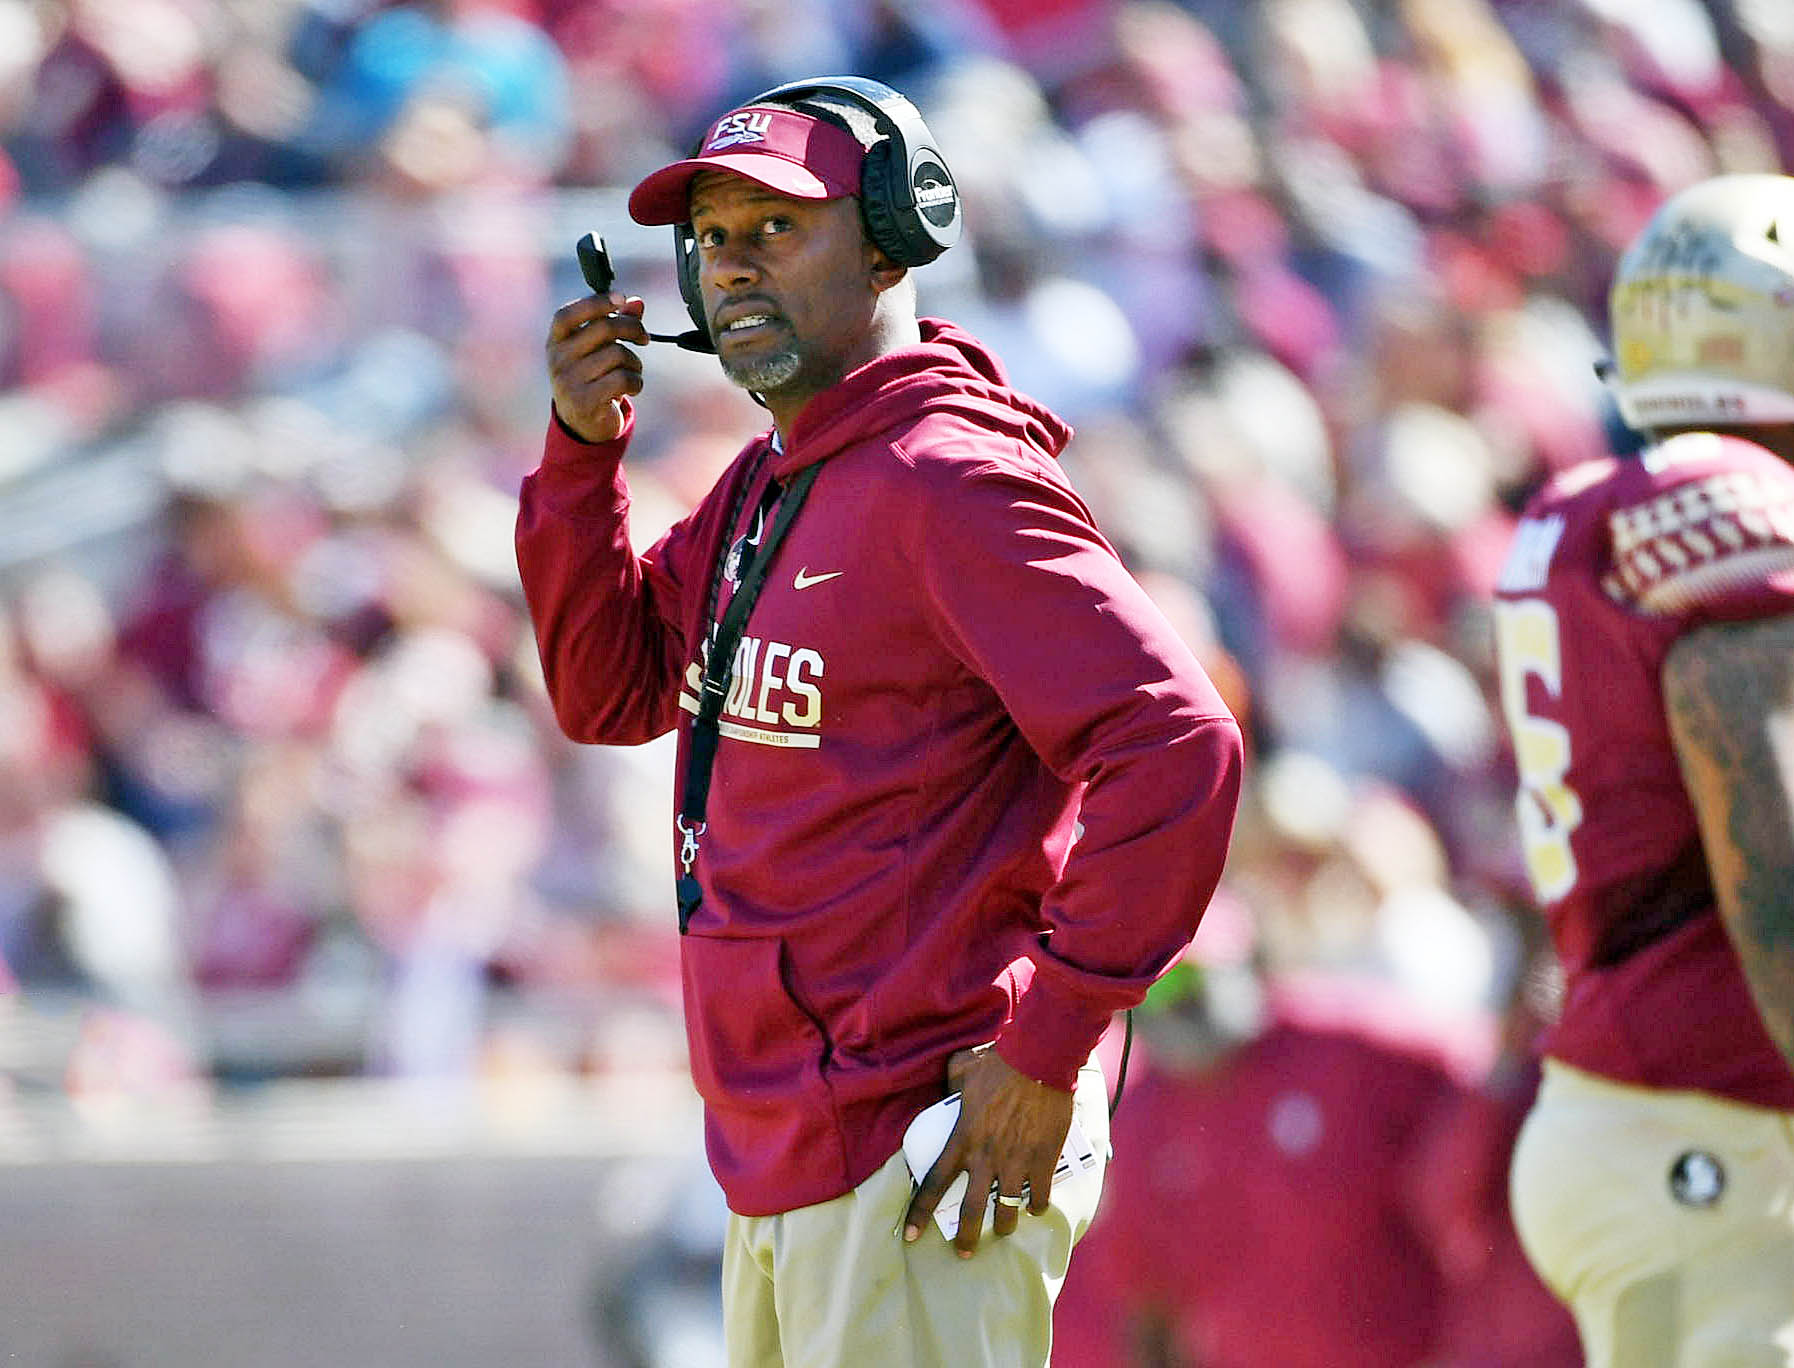 Florida State defends Willie Taggart after racist social media post attacki...